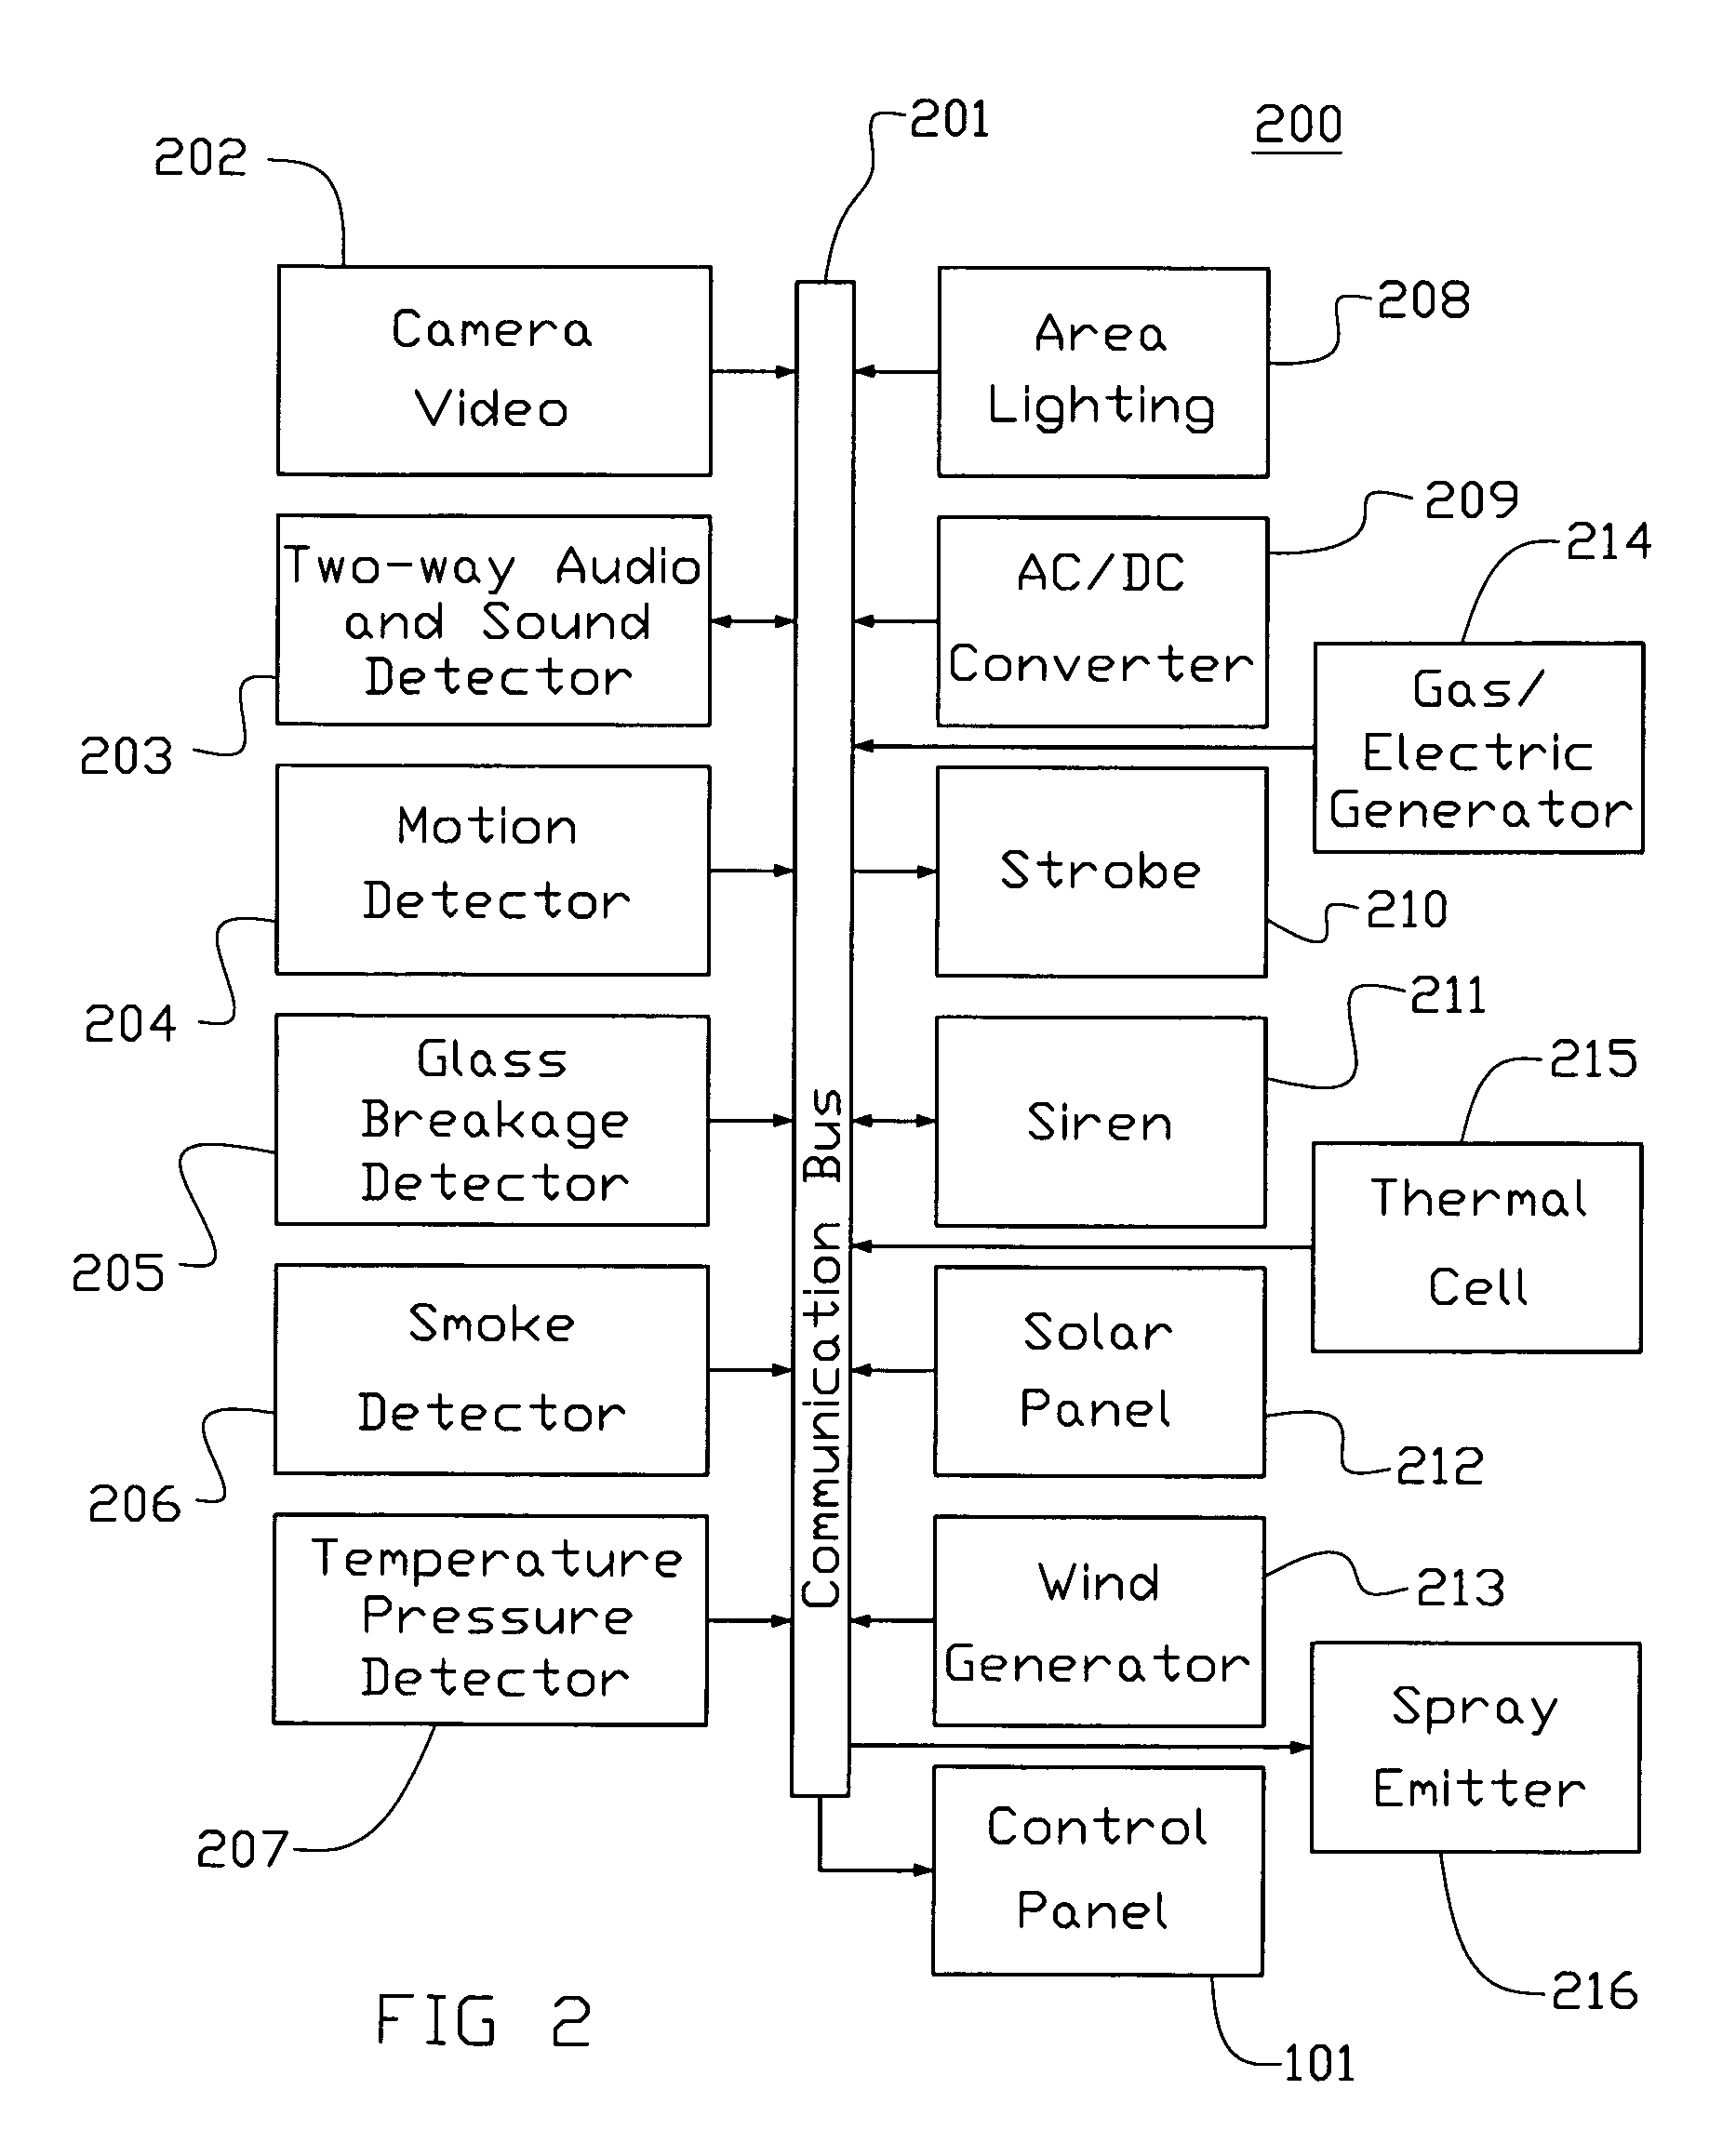 Method for detecting events at a secured location